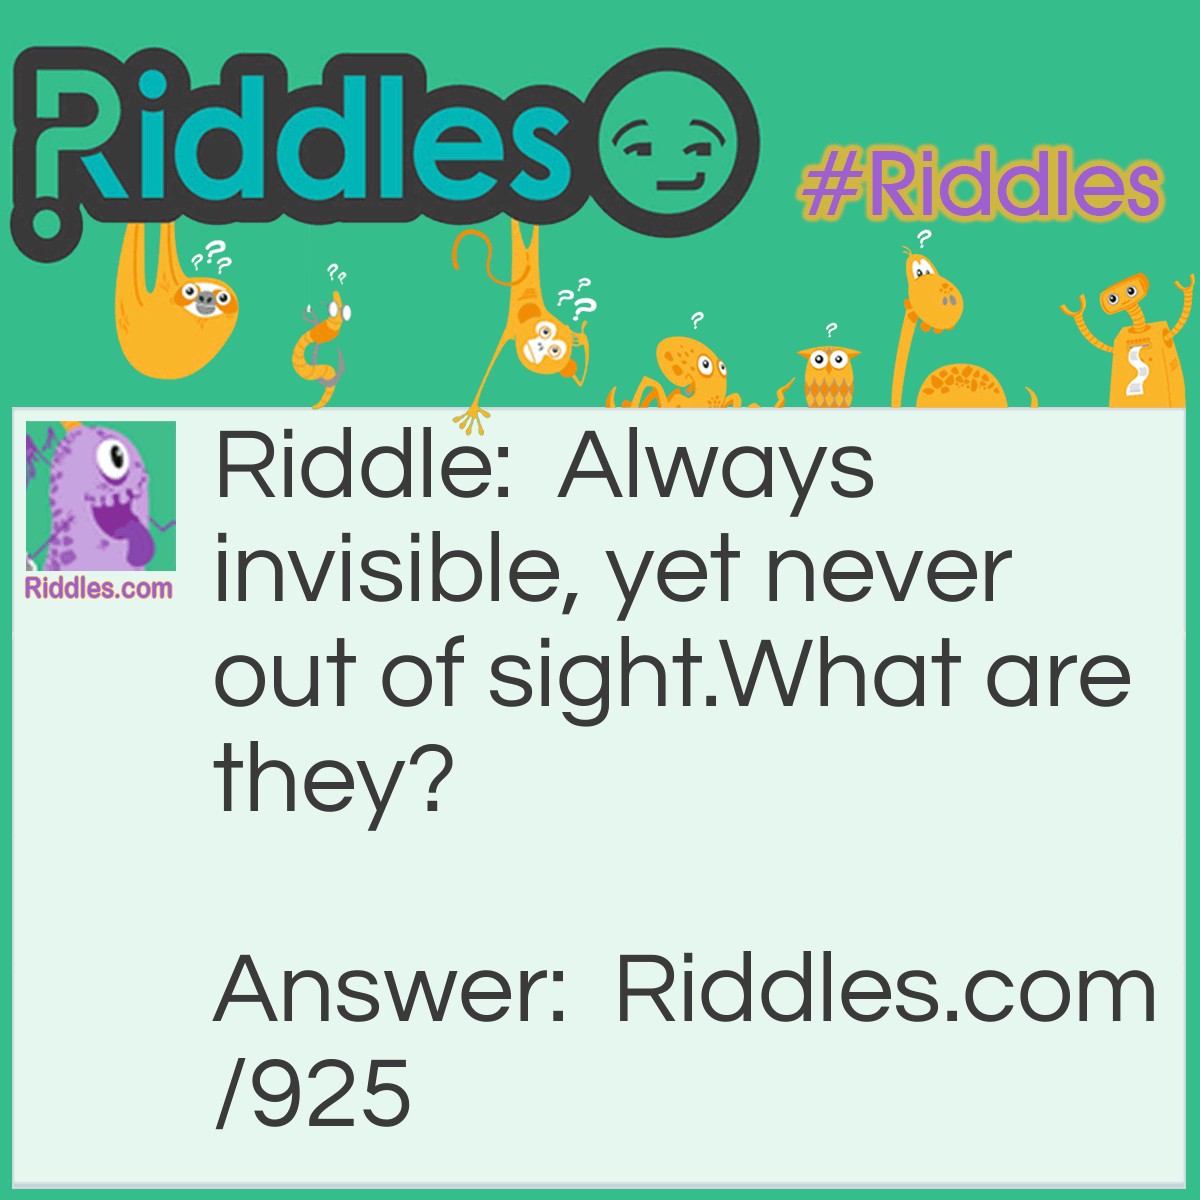 Riddle: Always invisible, yet never out of sight.
What are they? Answer: The letters I & S.